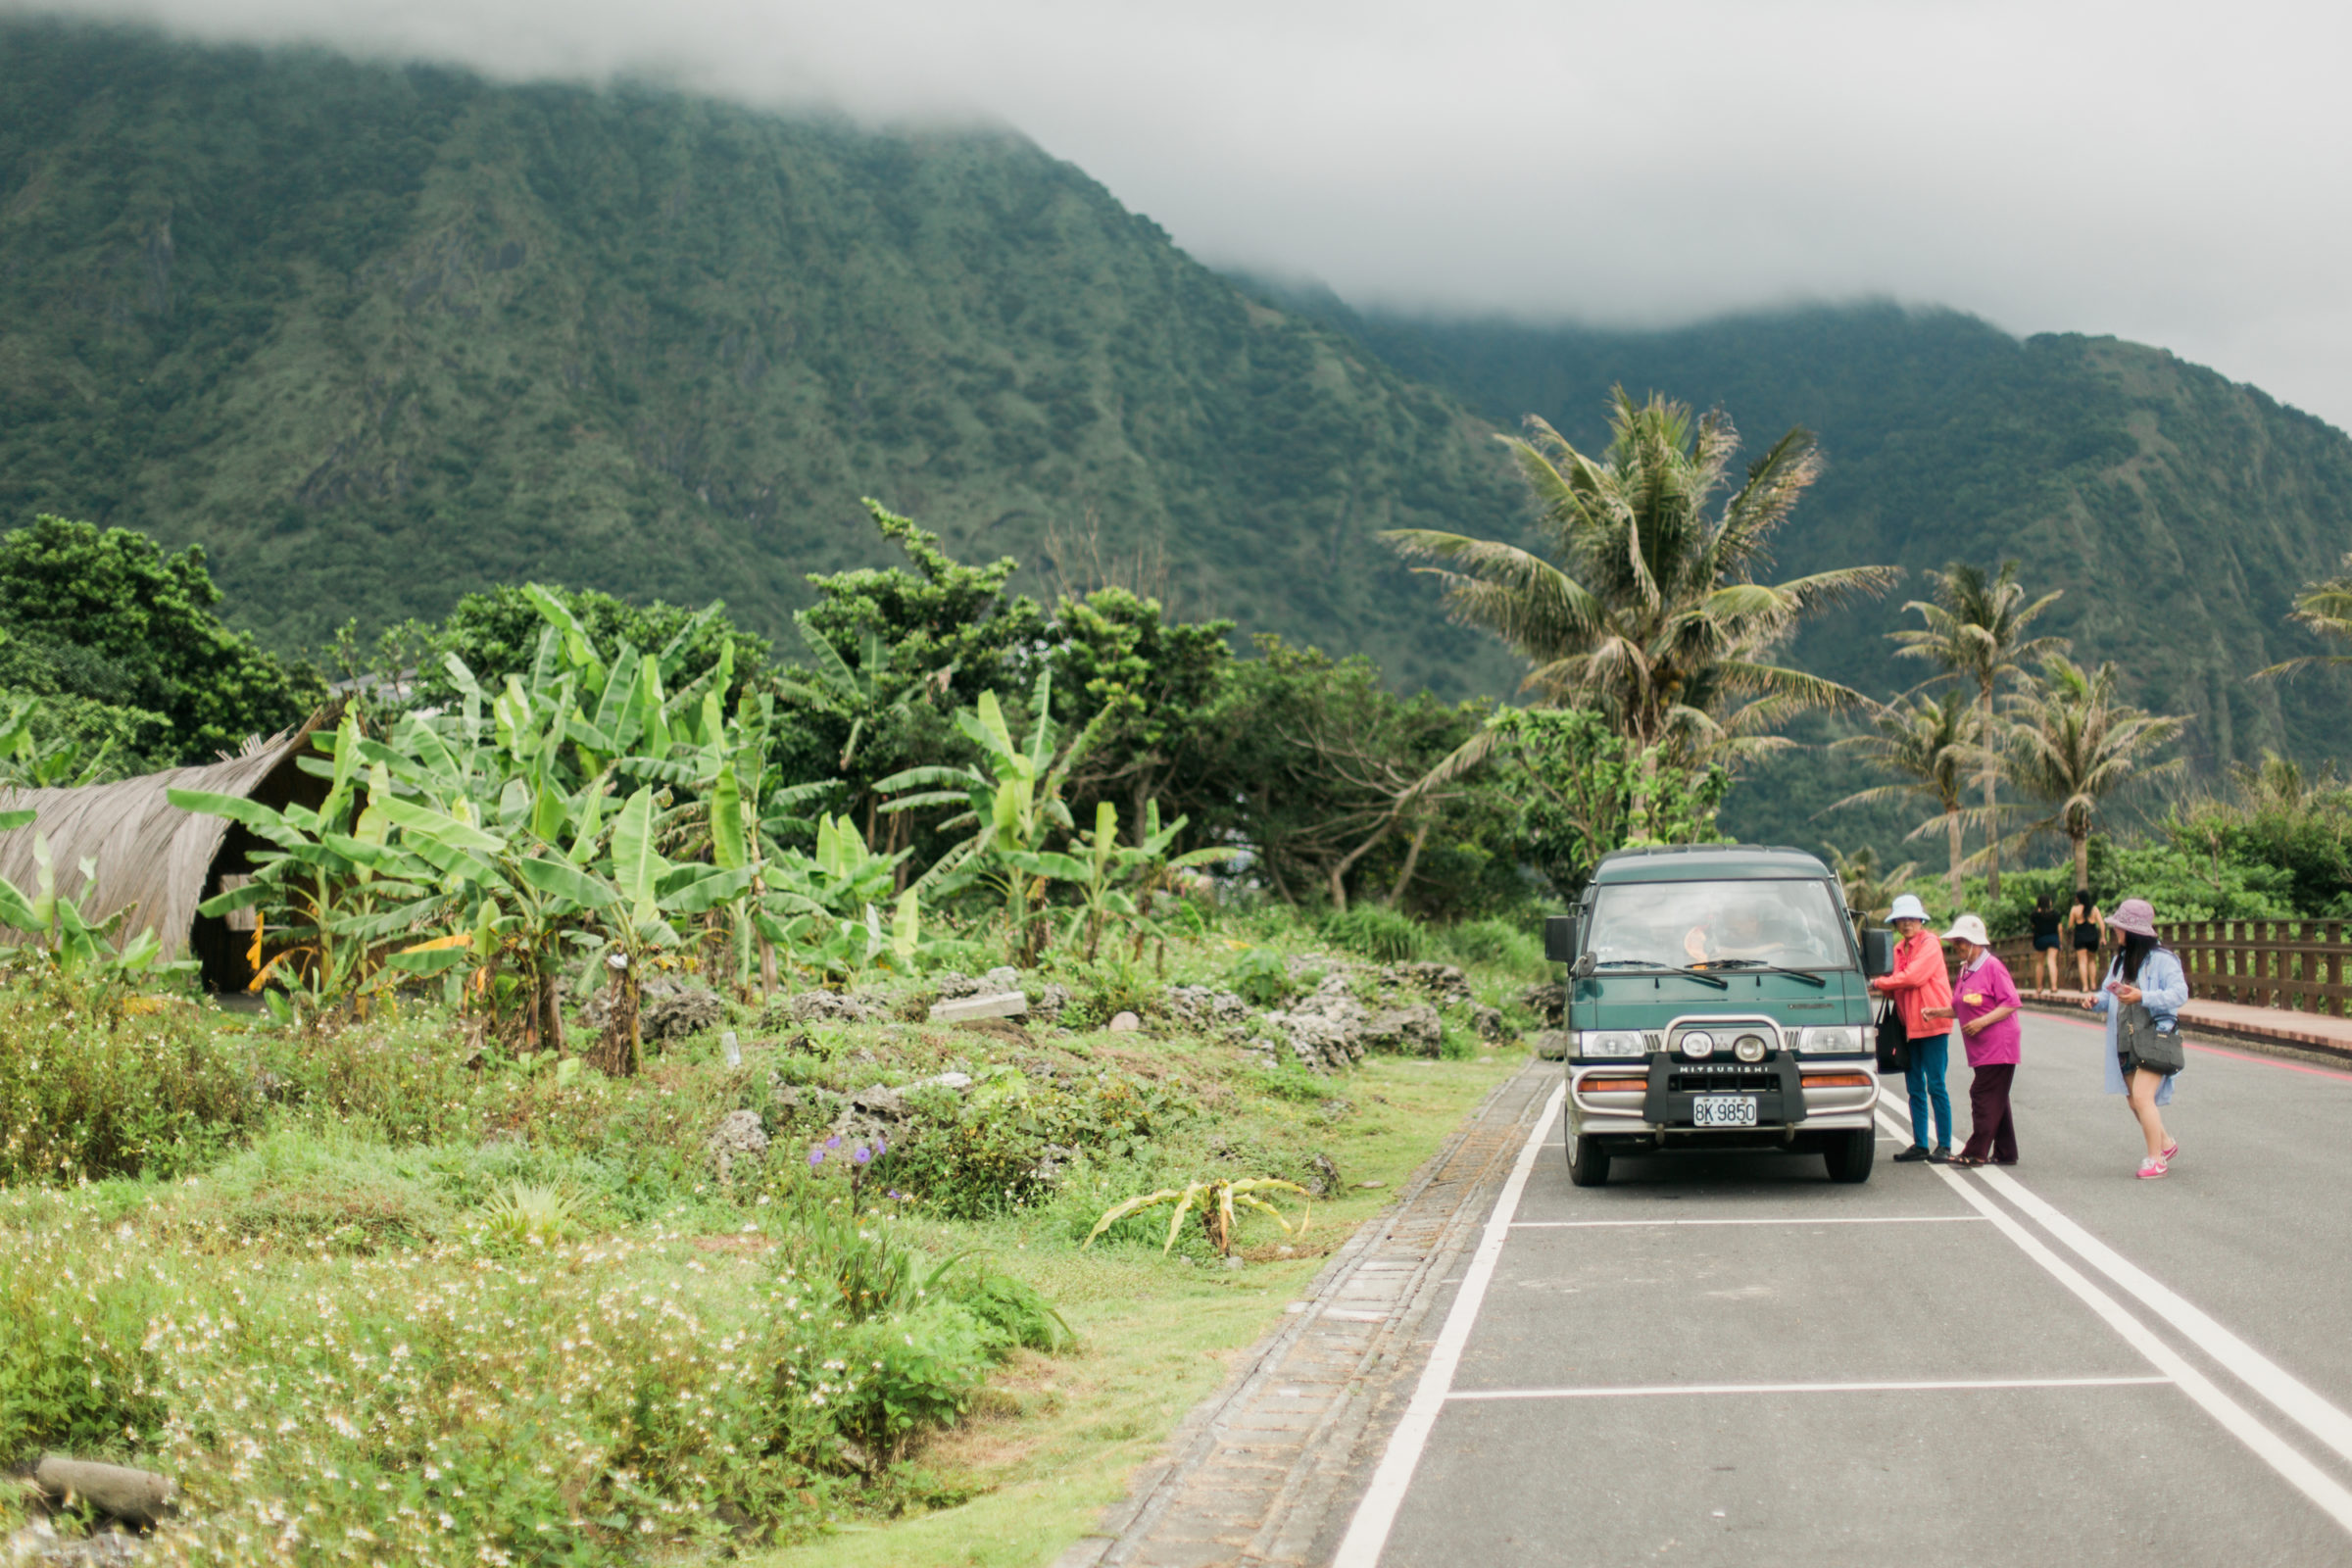 A family get into a green minivan on the side of the road bordering the dense green vegetation.